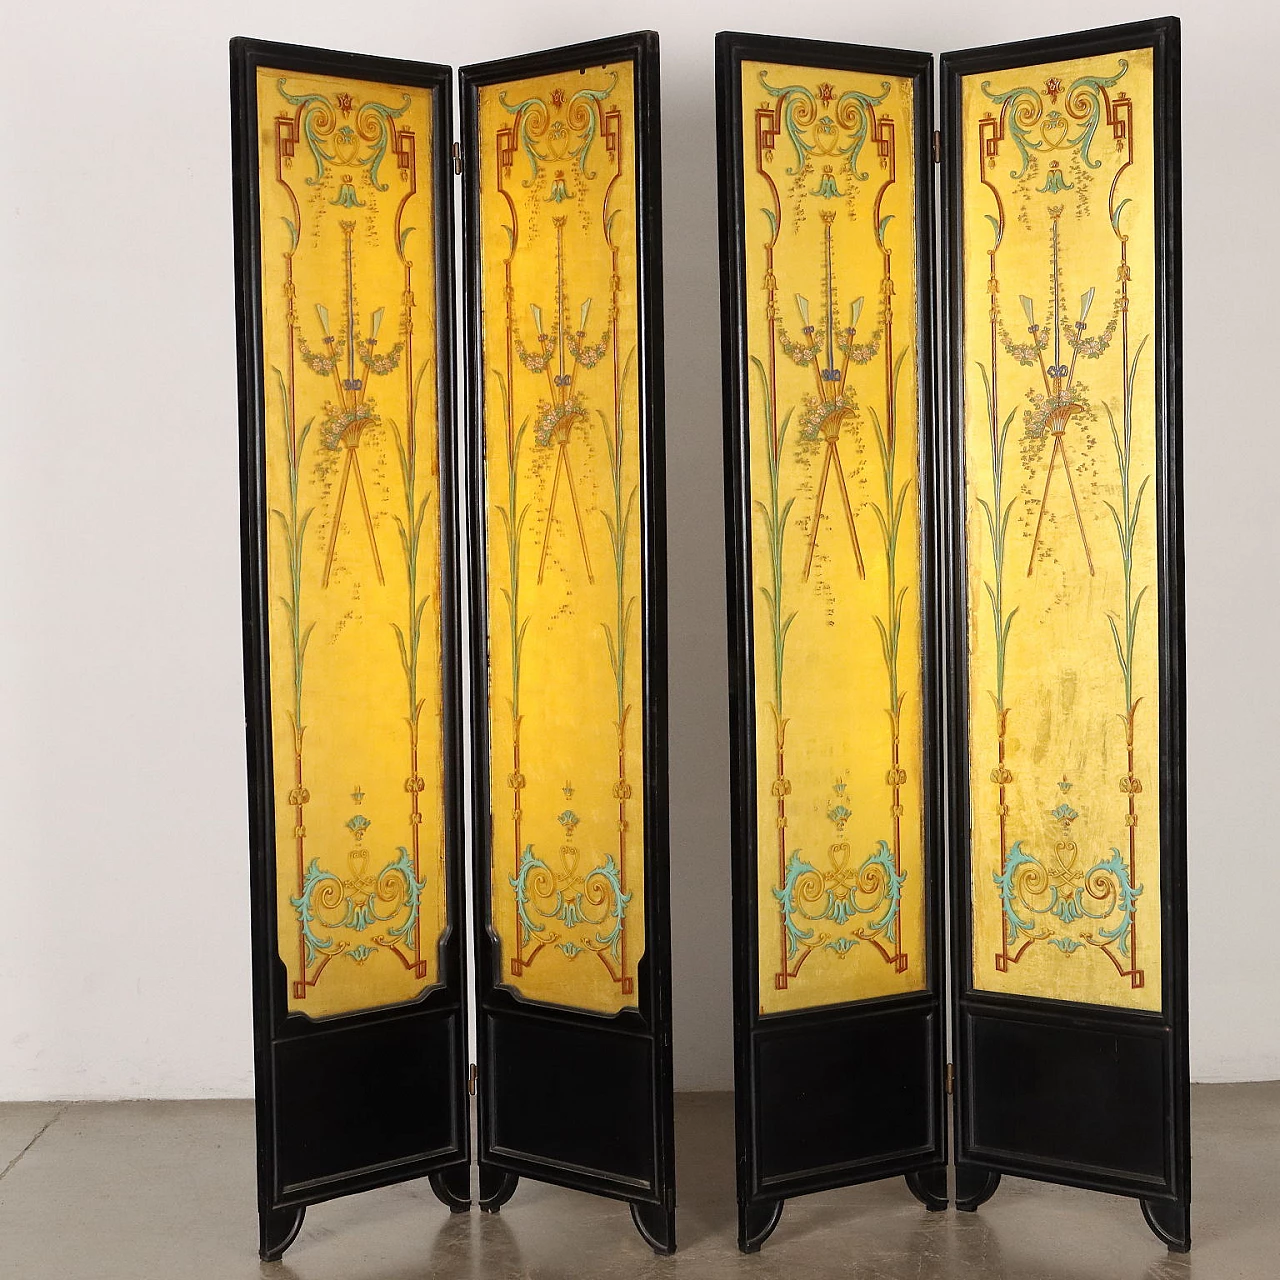 Folding screen in ebonized wood and glass with gold leaf 10